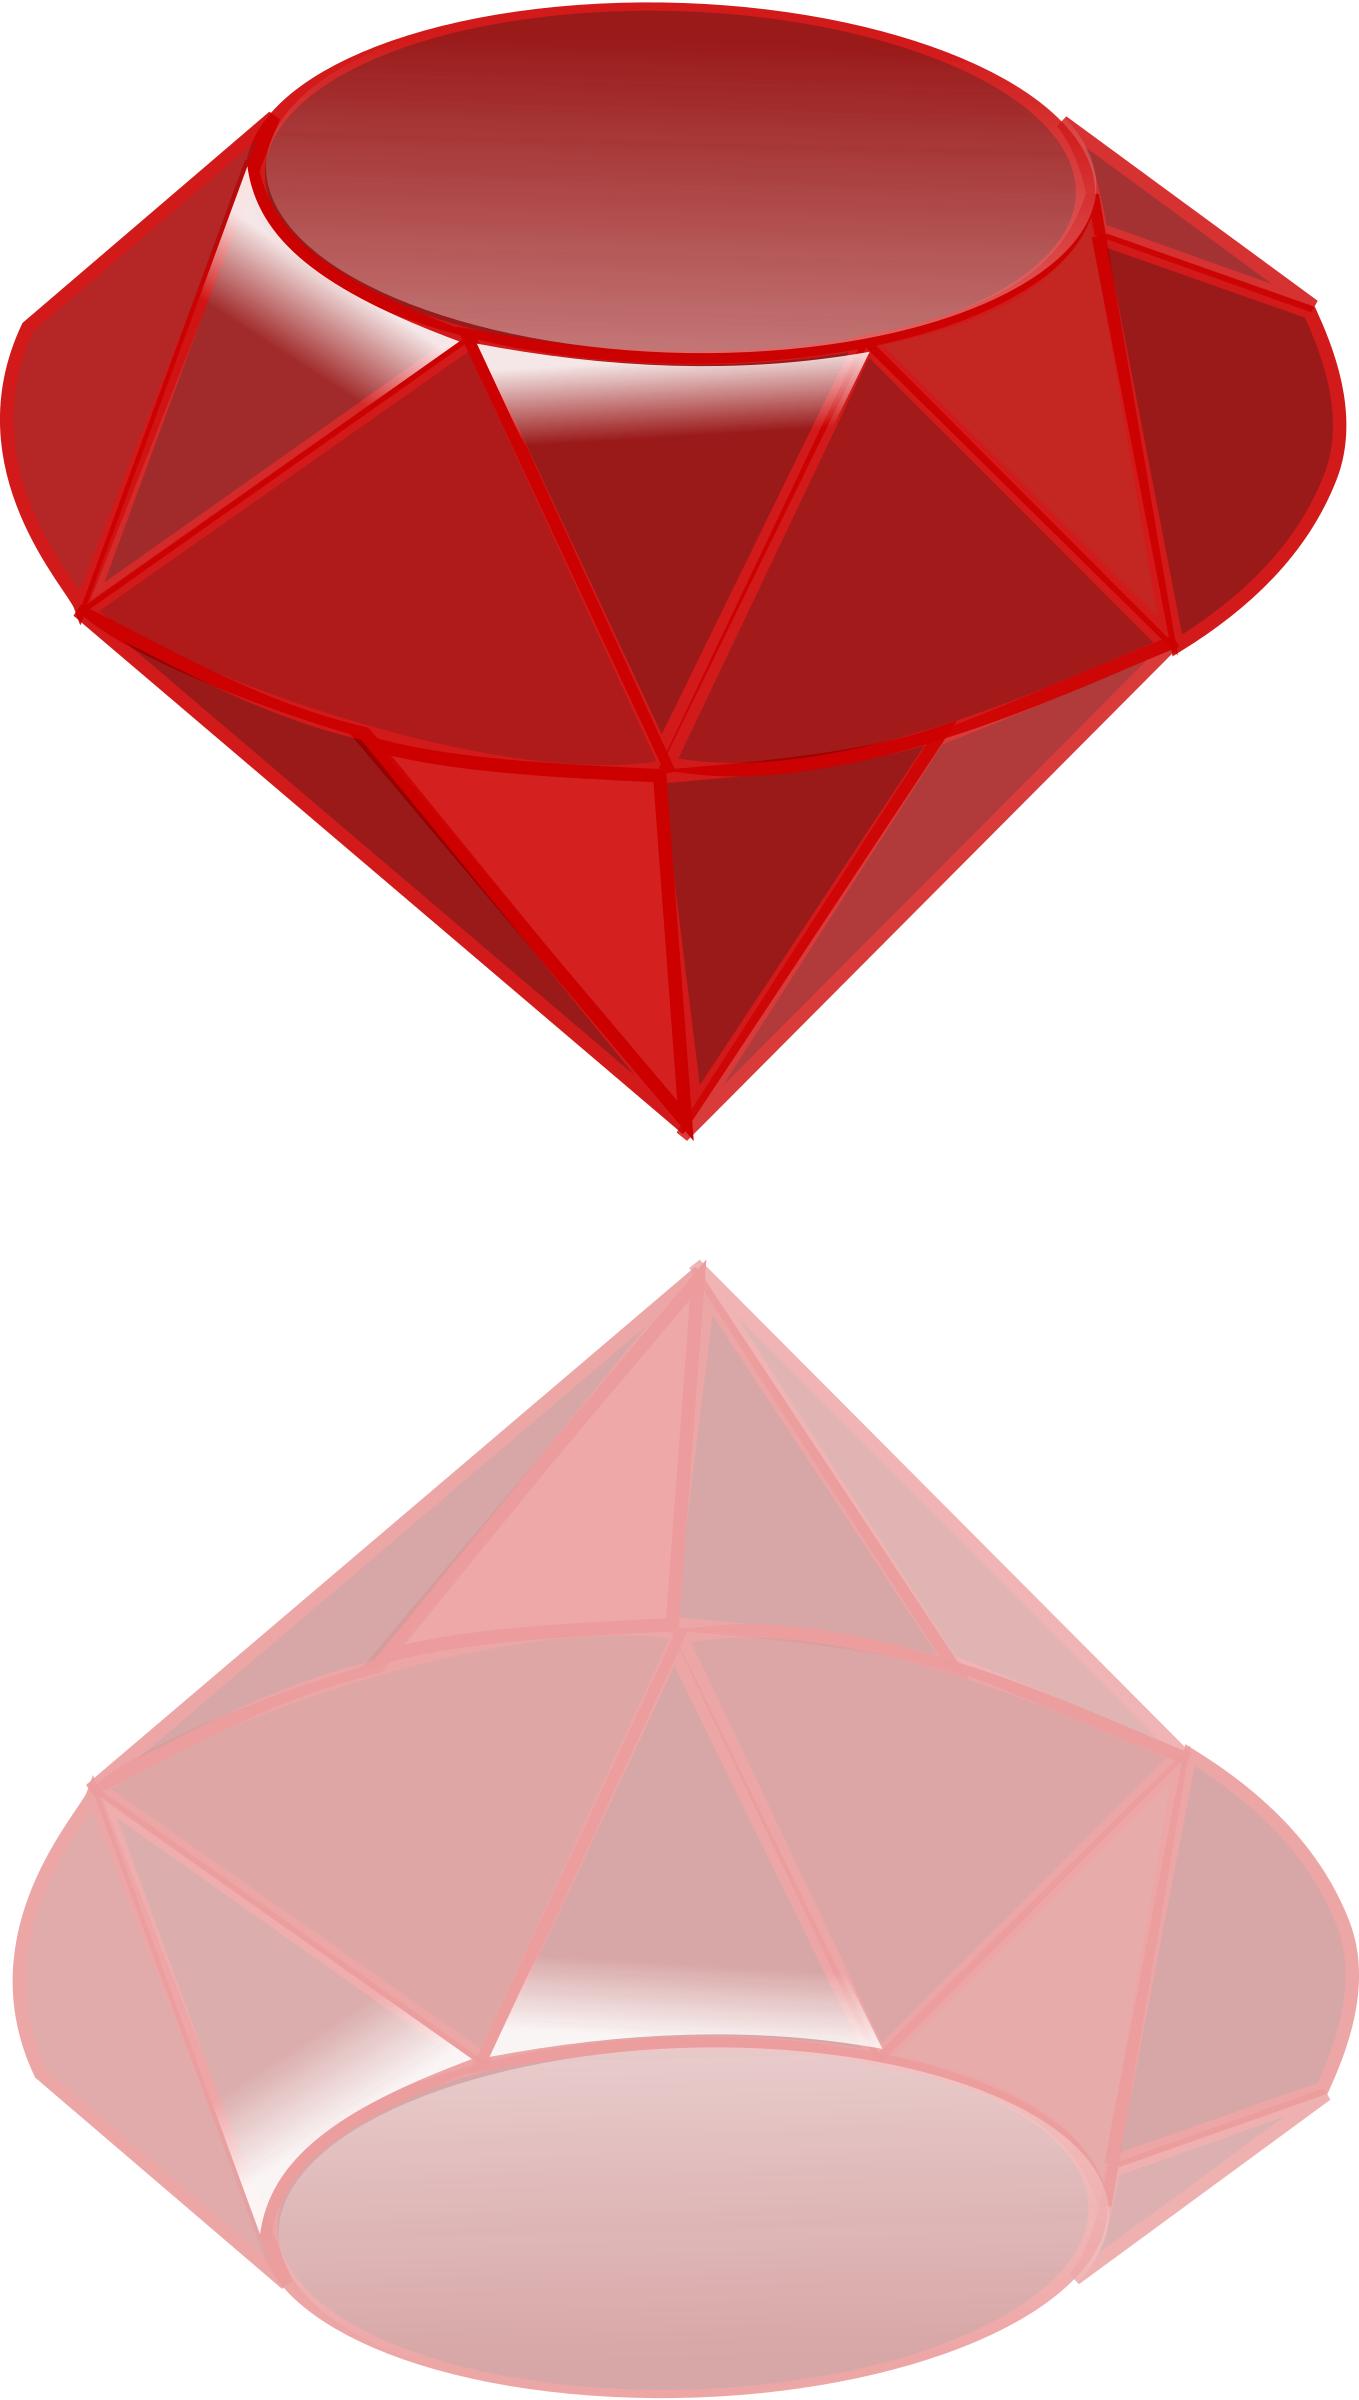 ruby png